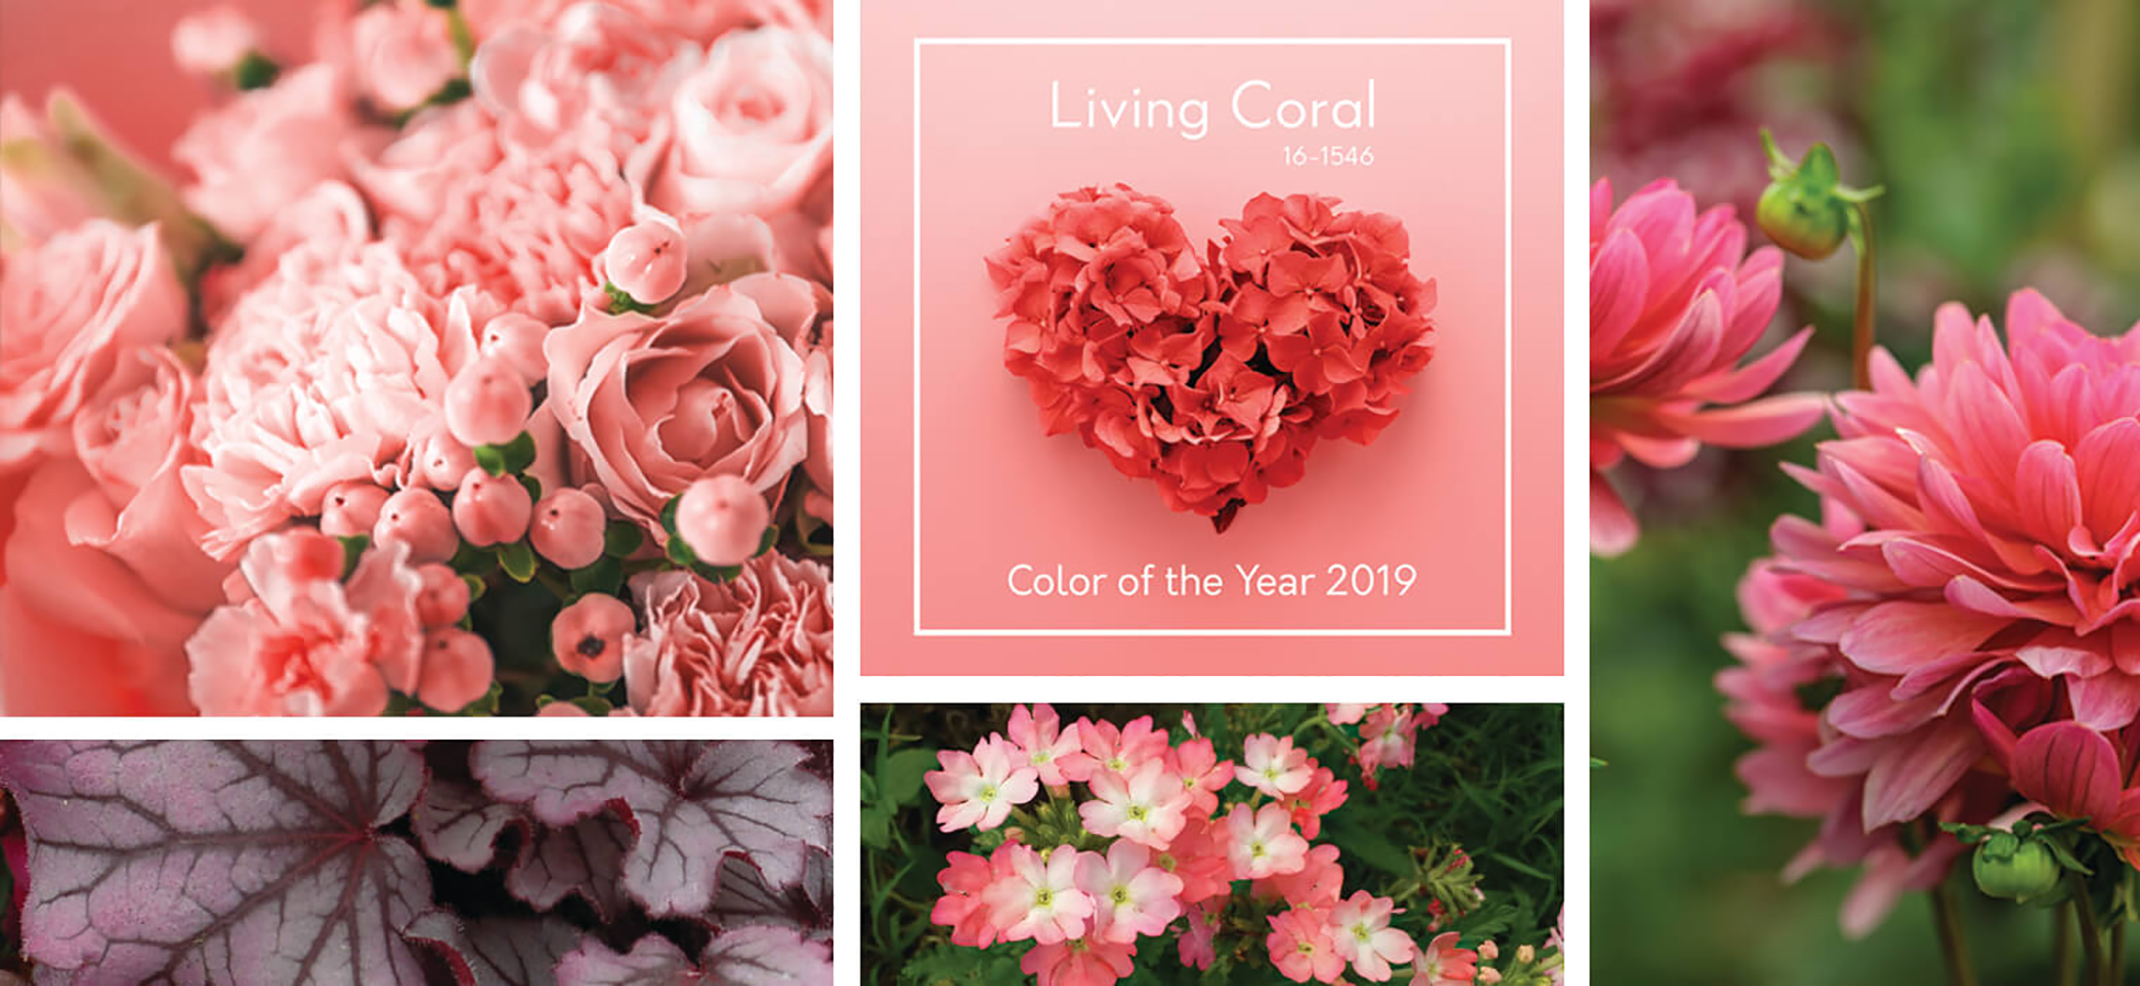 Living coral 2019 color of the year with images displaying flowers and plants in that color